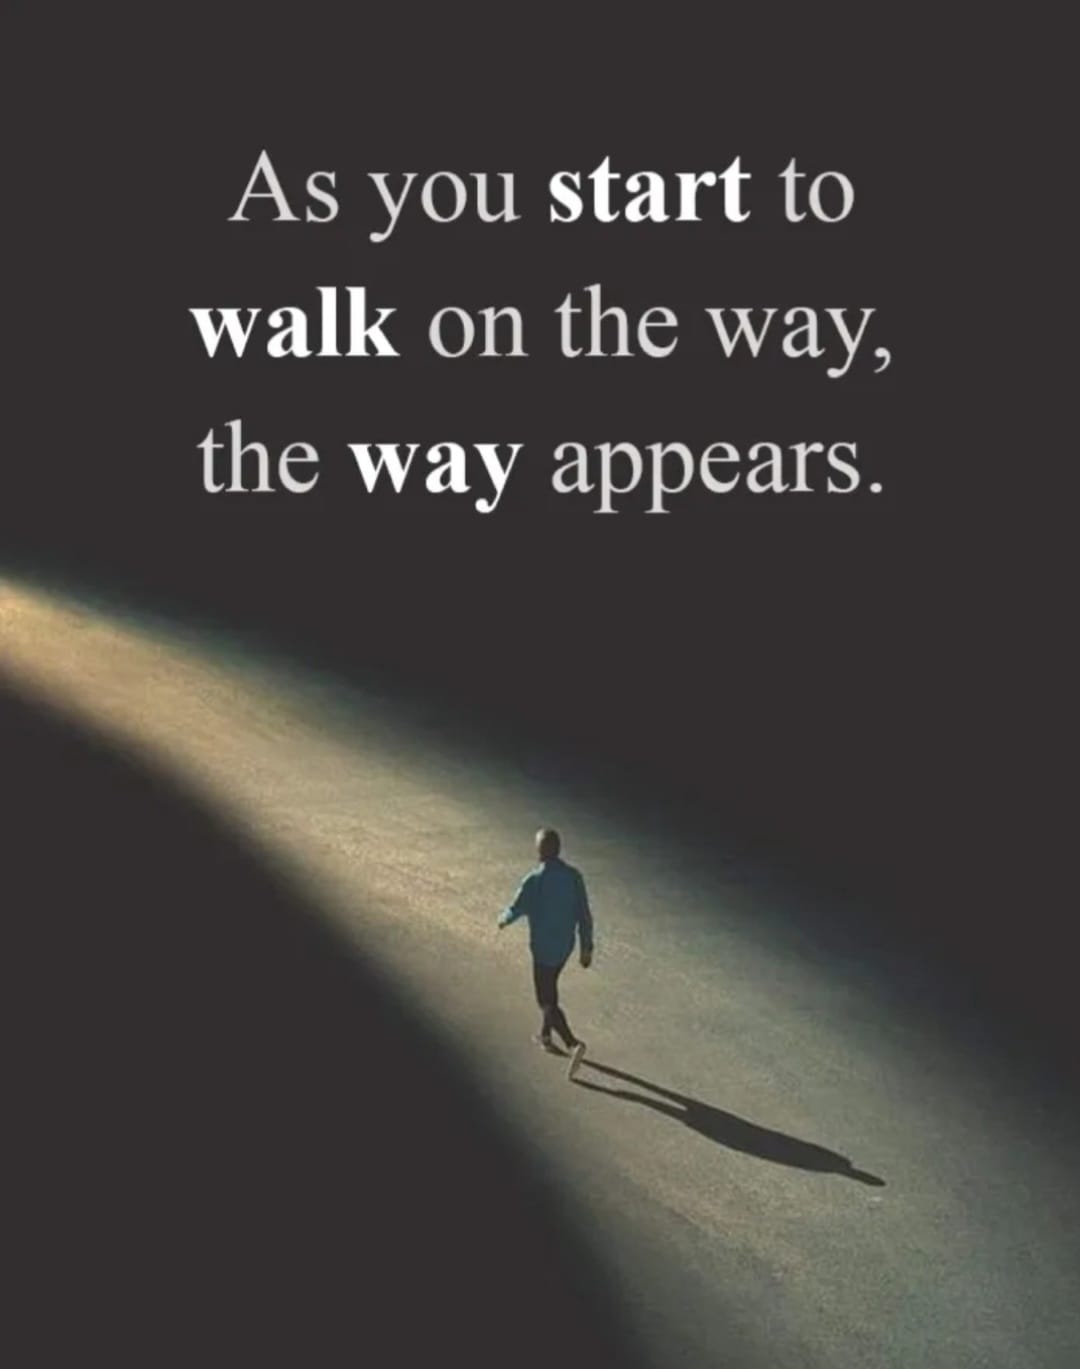 As you stars to walk on the way the way appears